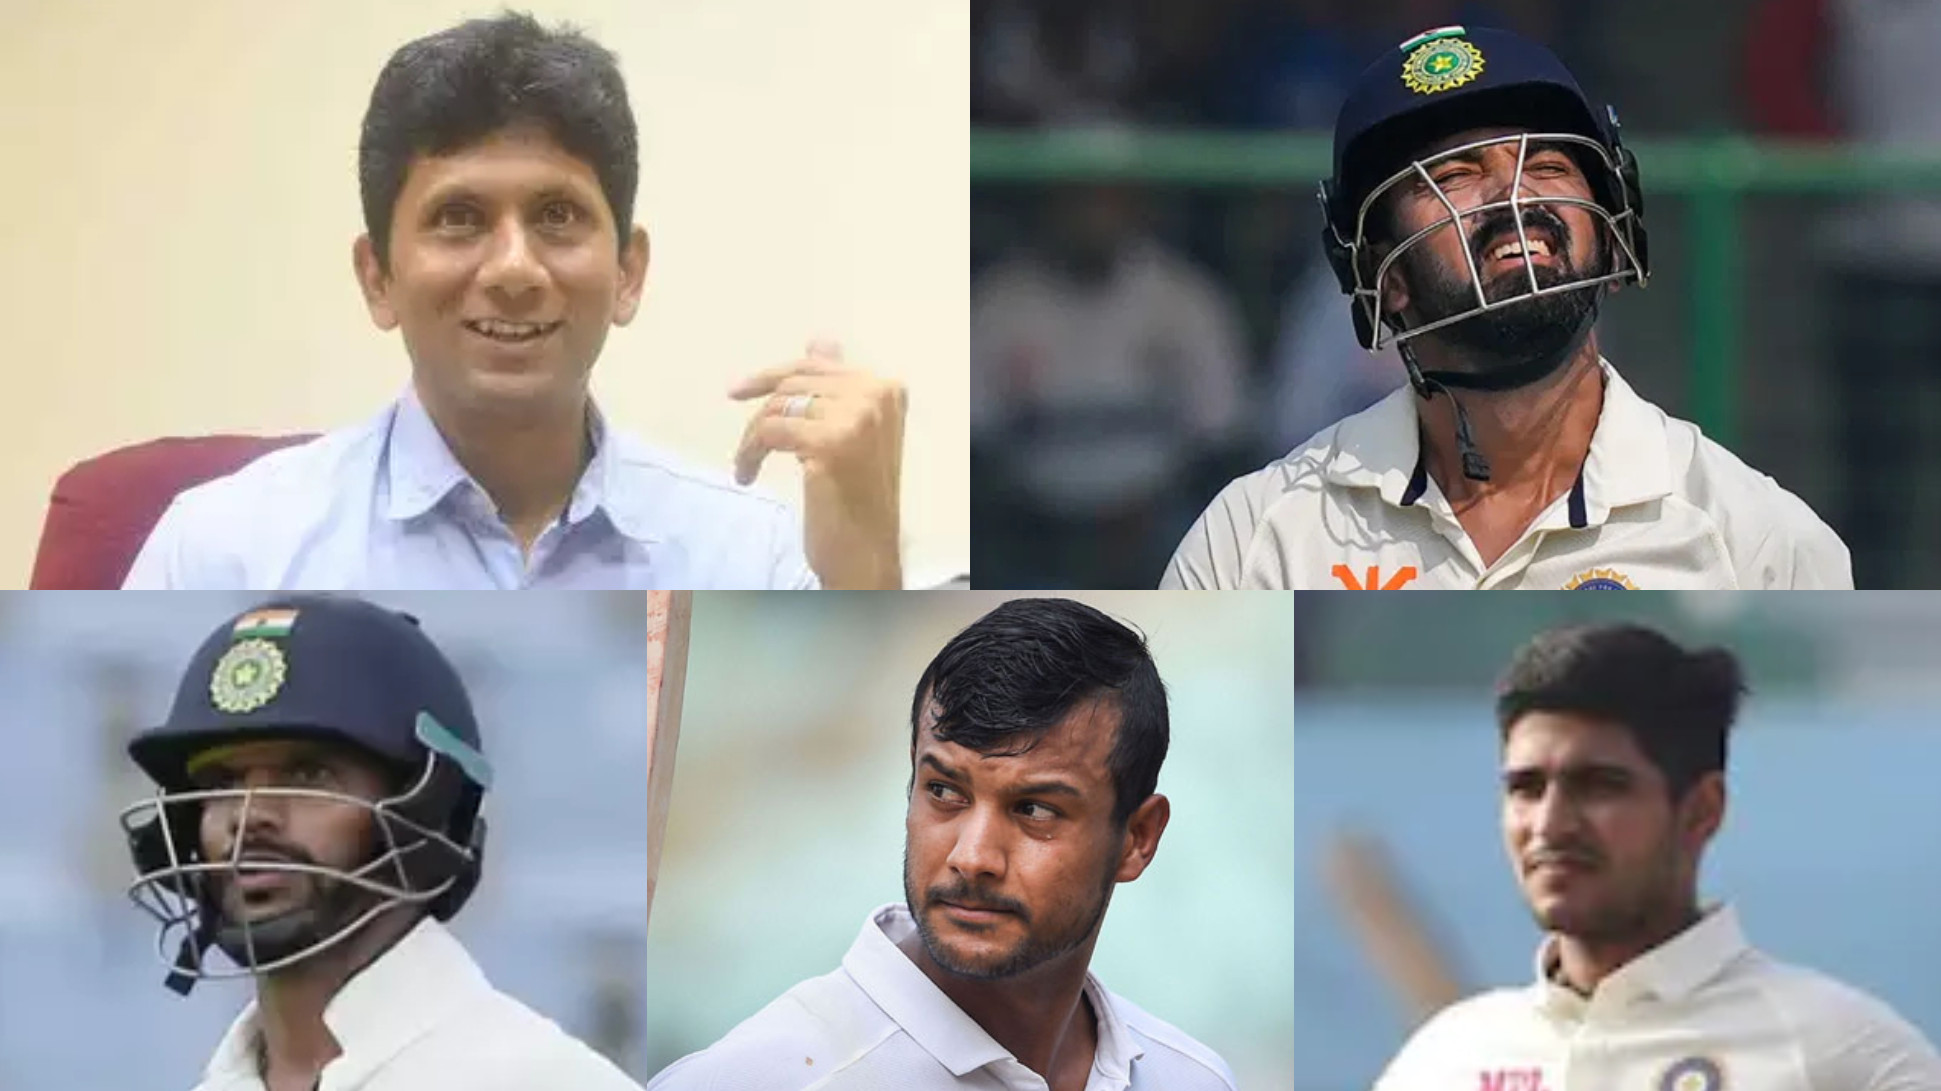 IND v AUS 2023: Venkatesh Prasad shares stats of Rahul’s overseas record; compares with Dhawan, Gill, Mayank